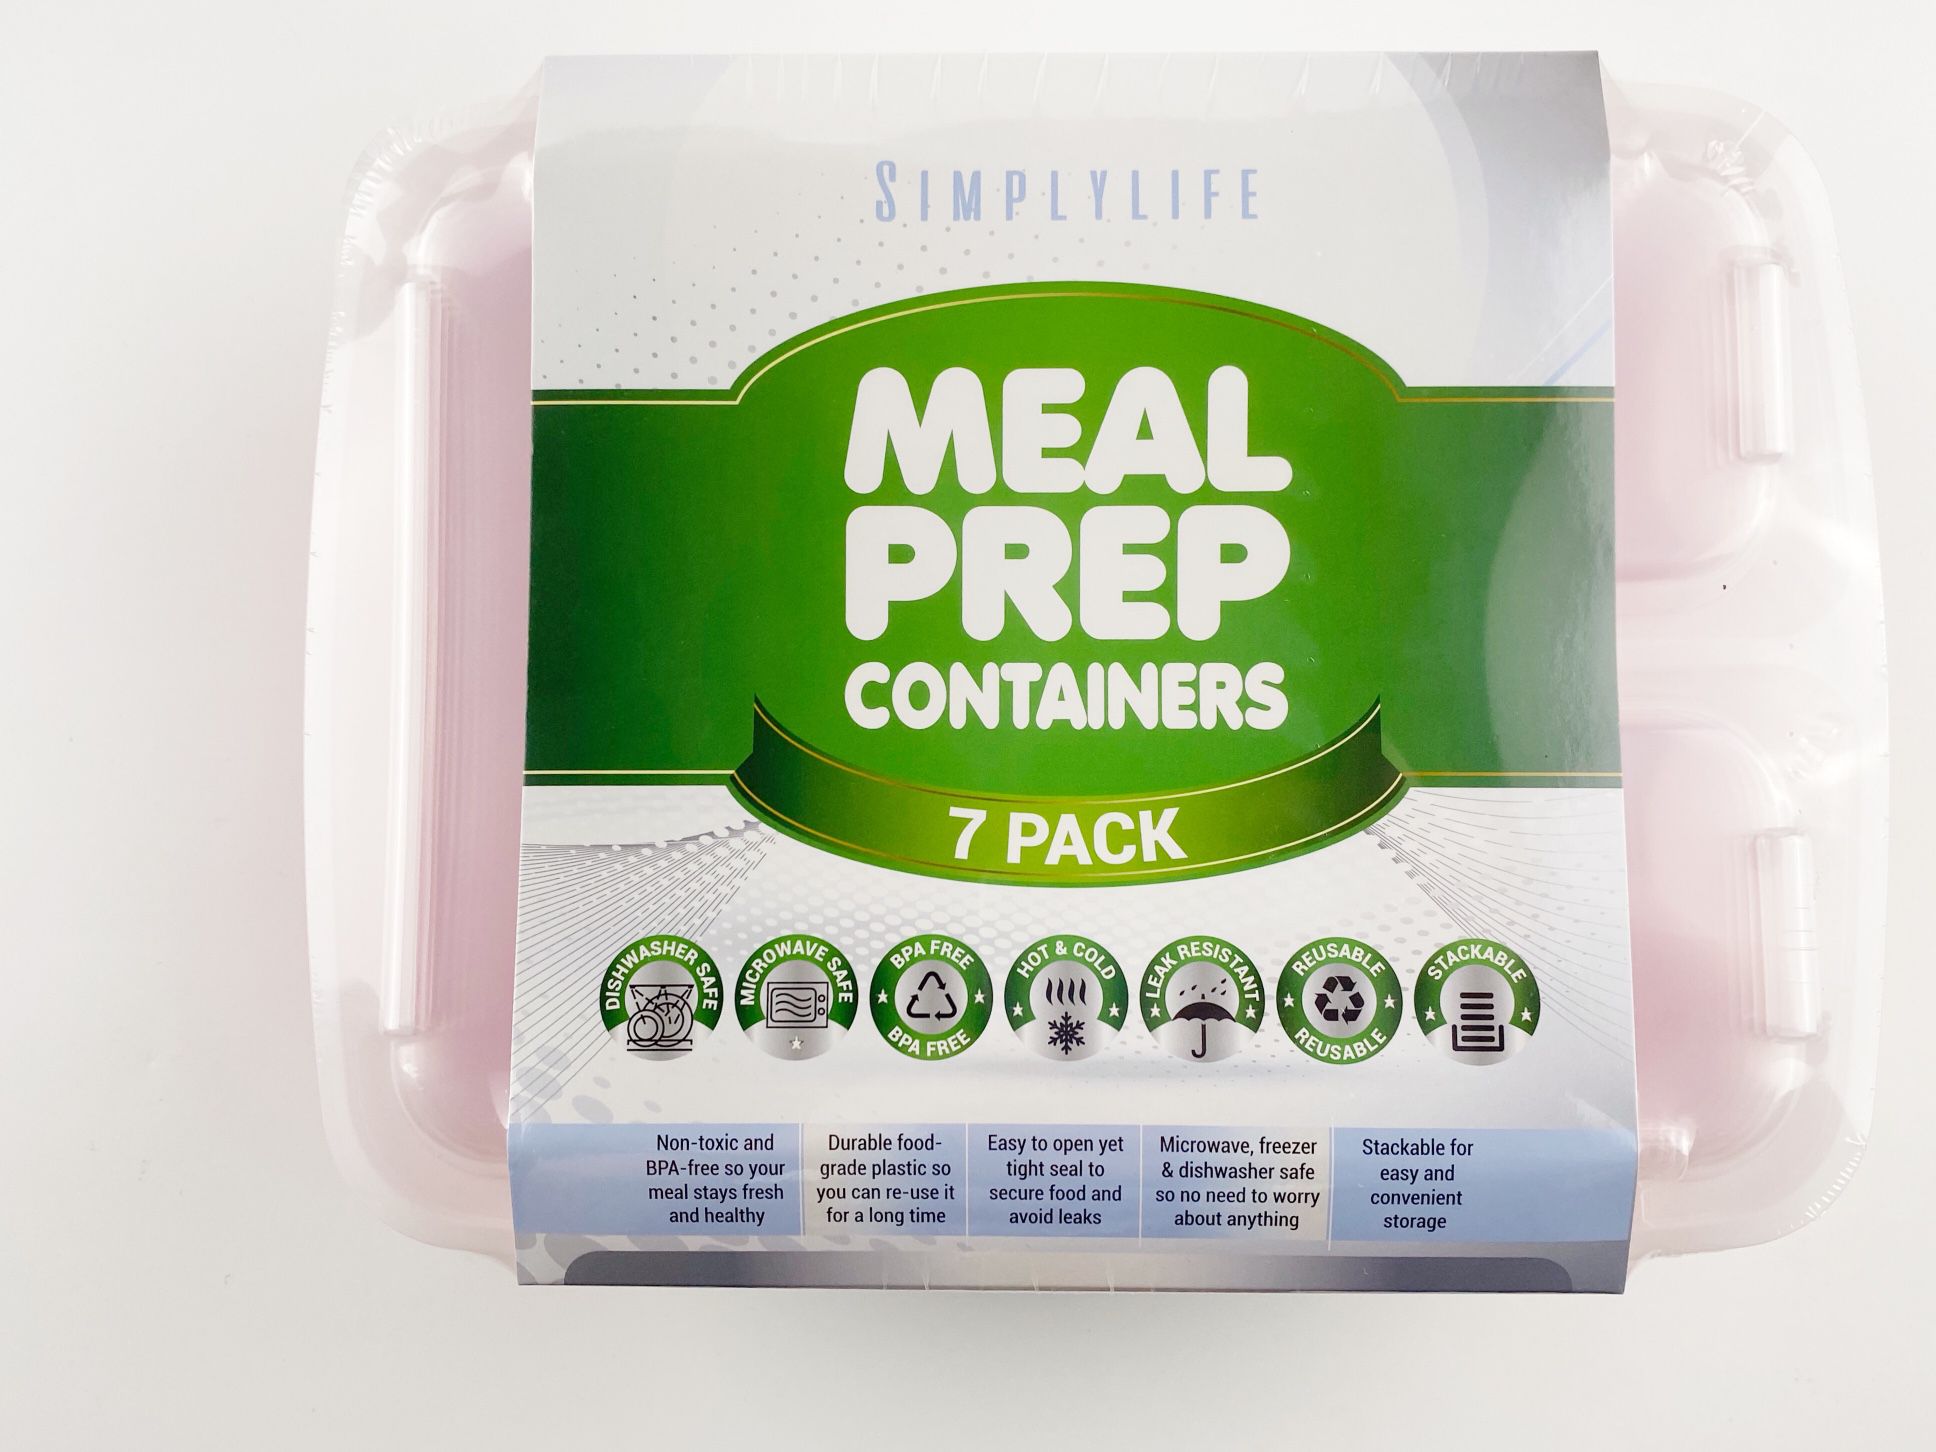 New simplylife 7 pack meal prep containers